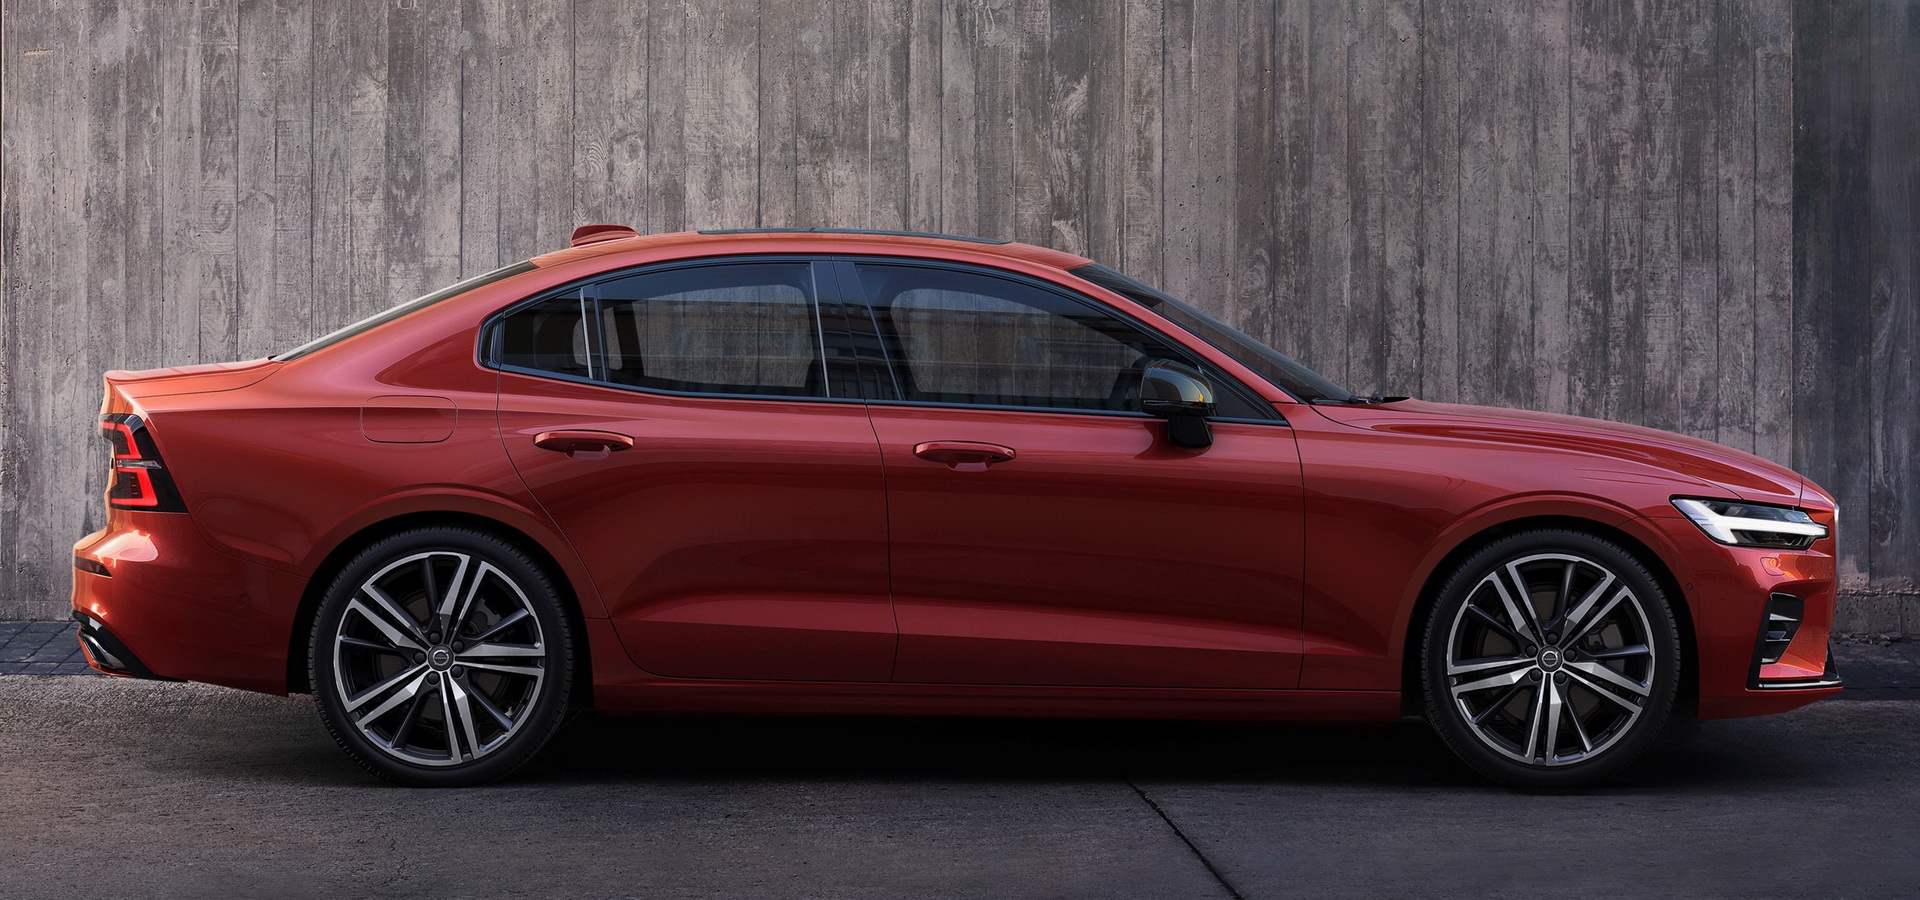 How Does The New 2019 Volvo S60 Stack Up Compared To Its ...
